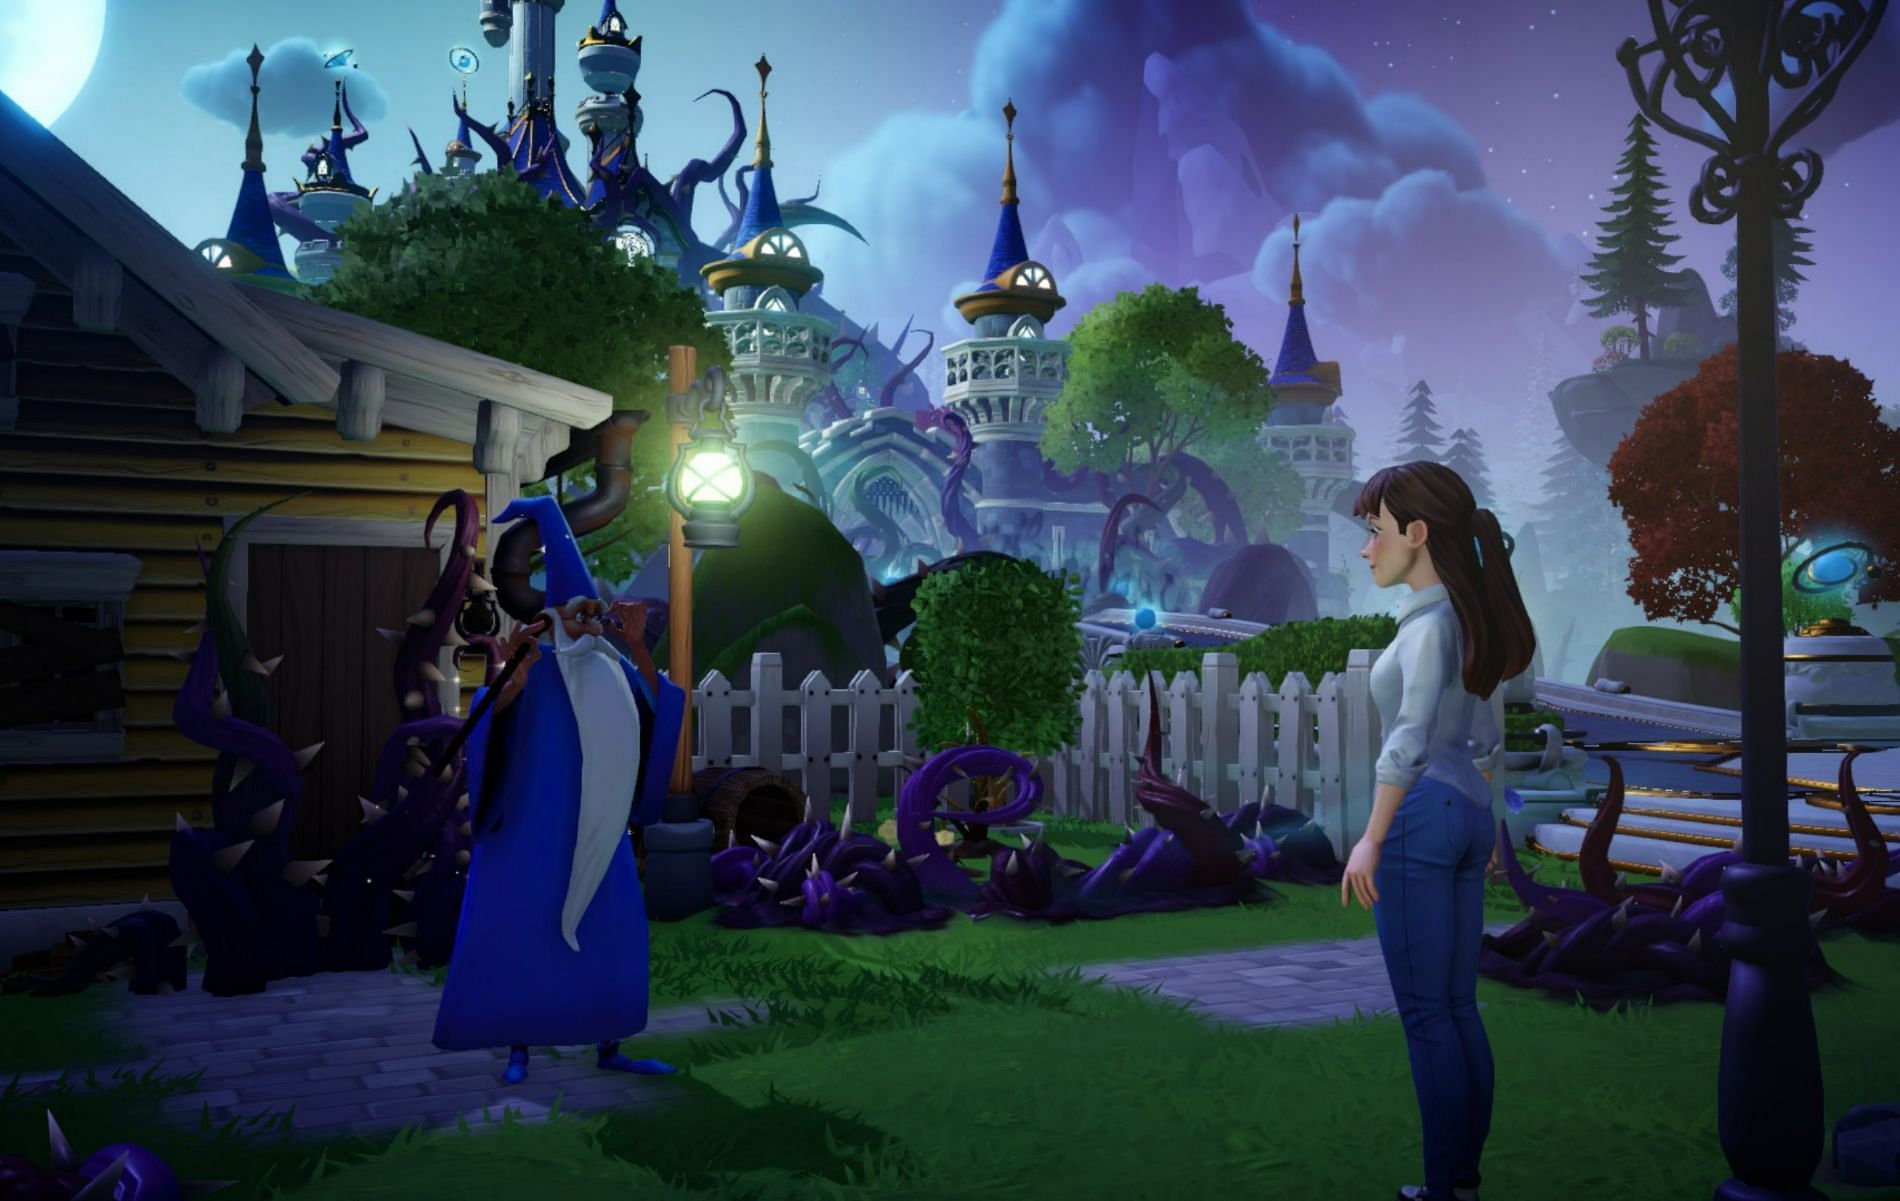 Is Disney Dreamlight Valley Coming To Xbox Game Pass